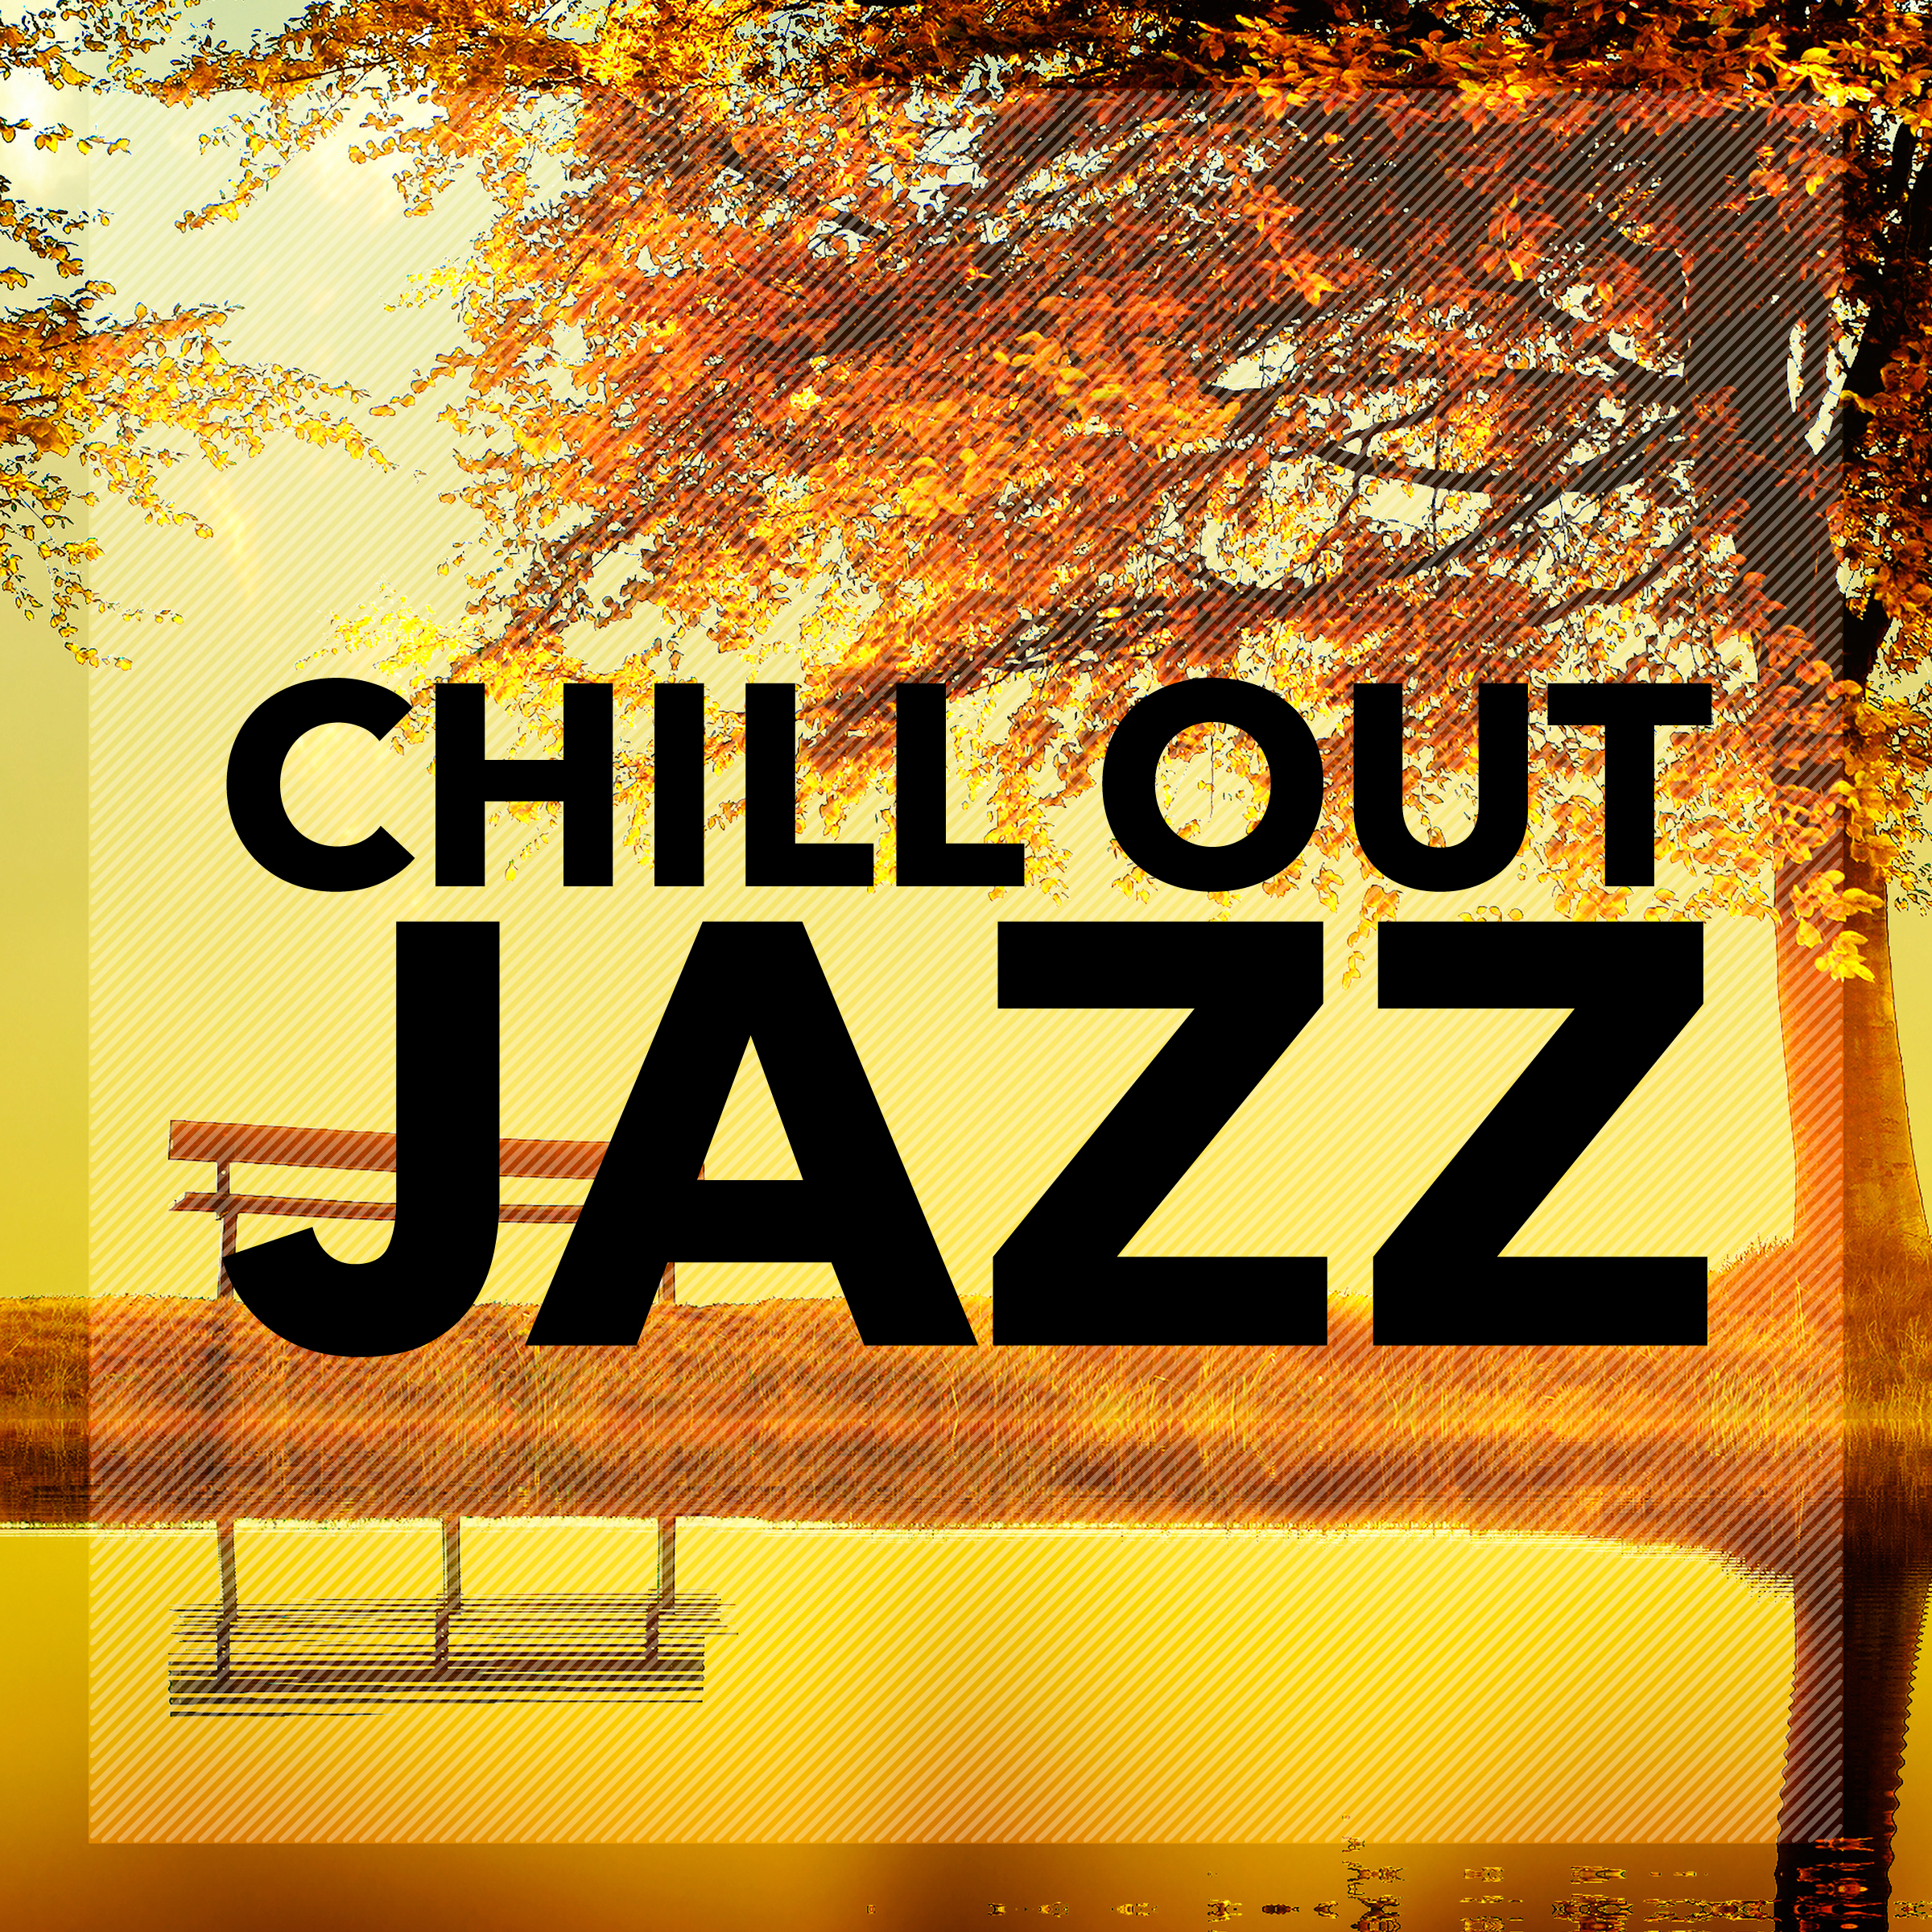 Chill Out Jazz